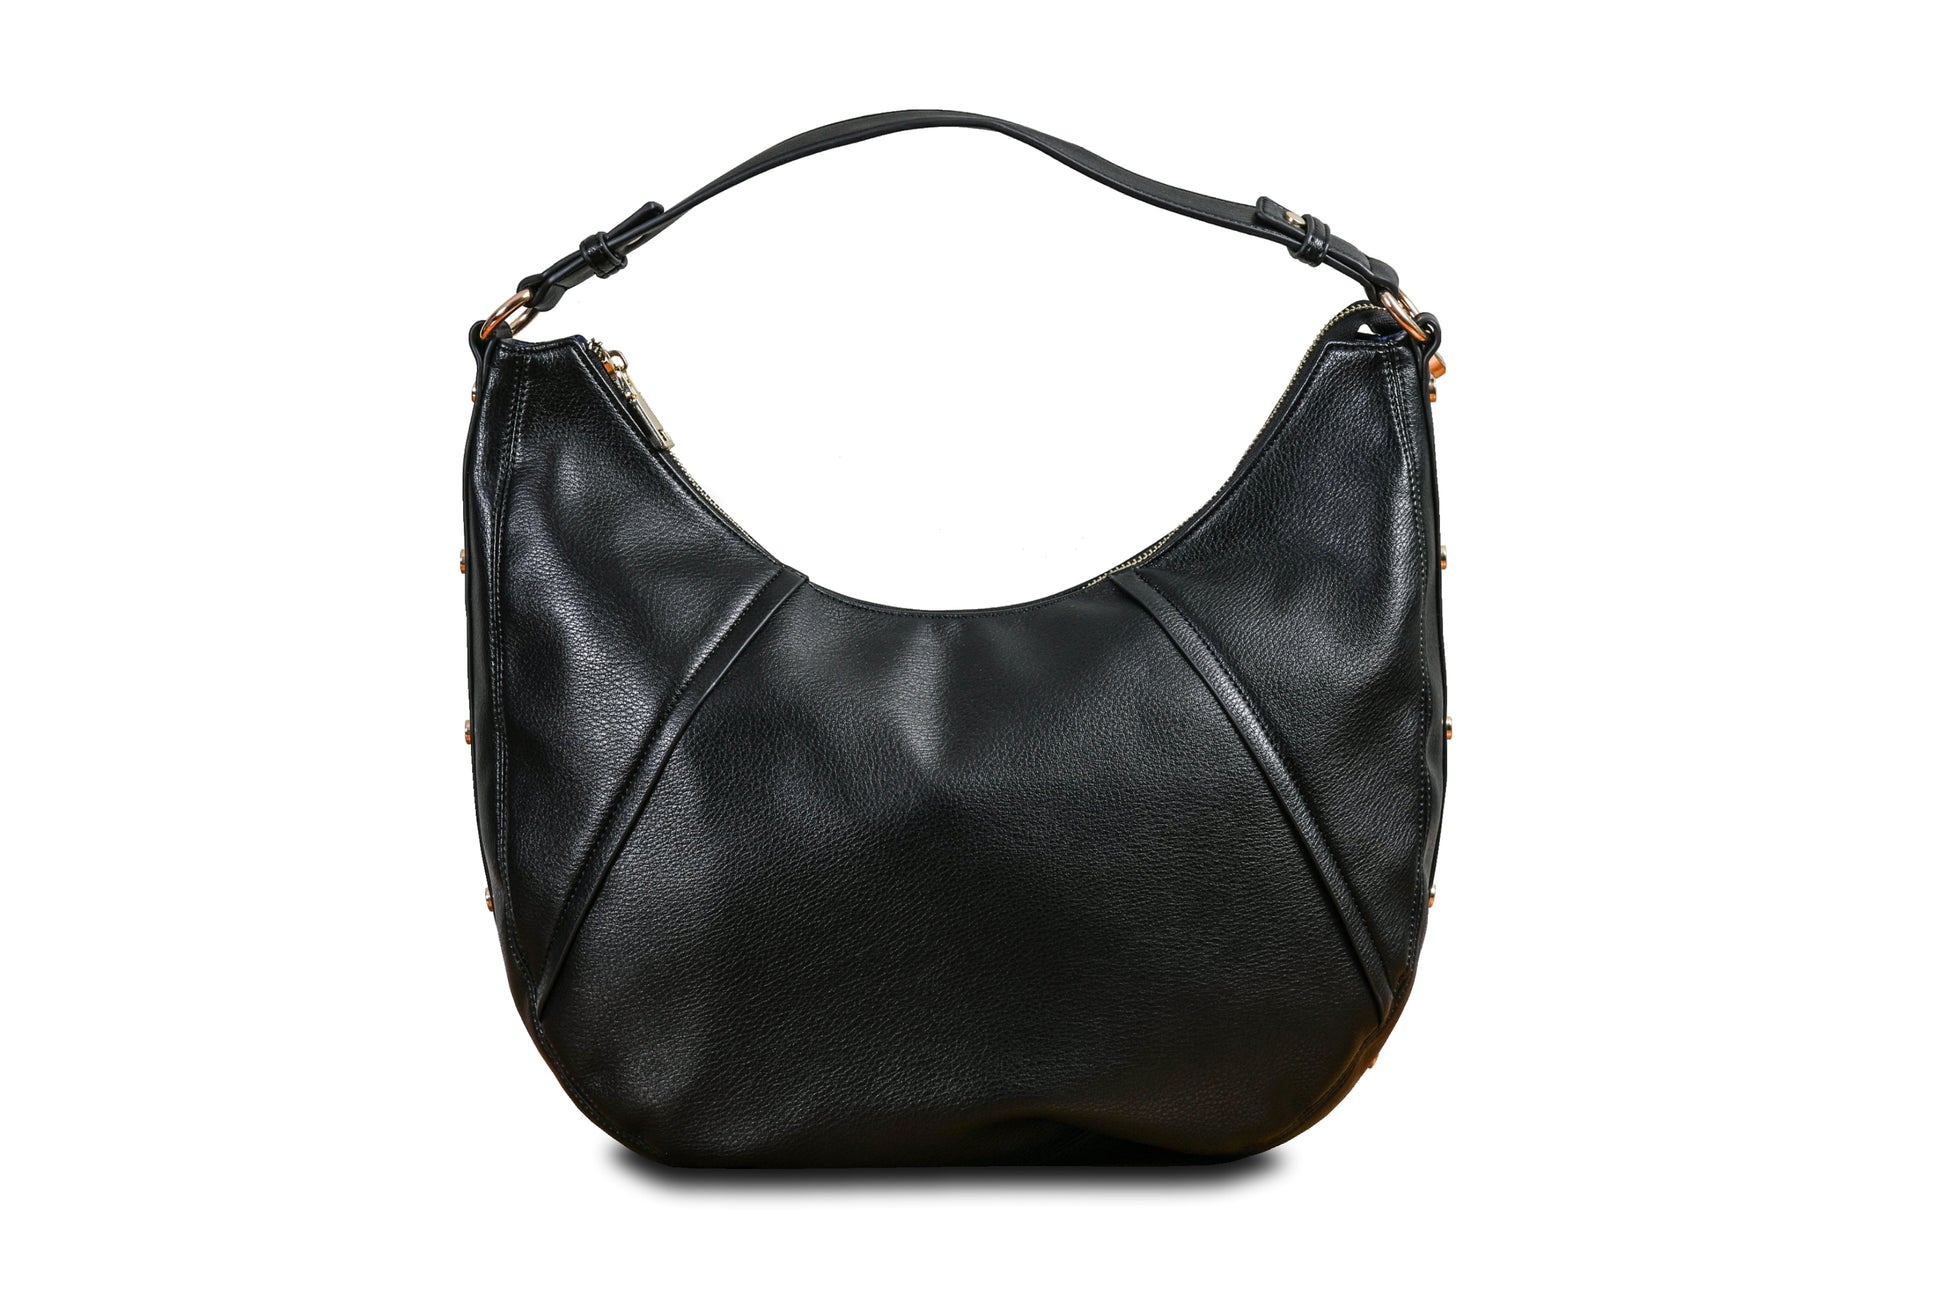 Luna Midnight Black Crescent Pebble Grain Faux Leather Handbag made by Dewi Maya front view available at the best boutique in Upstate South Carolina Spartanburg Greenville Dewi Maya Boutique